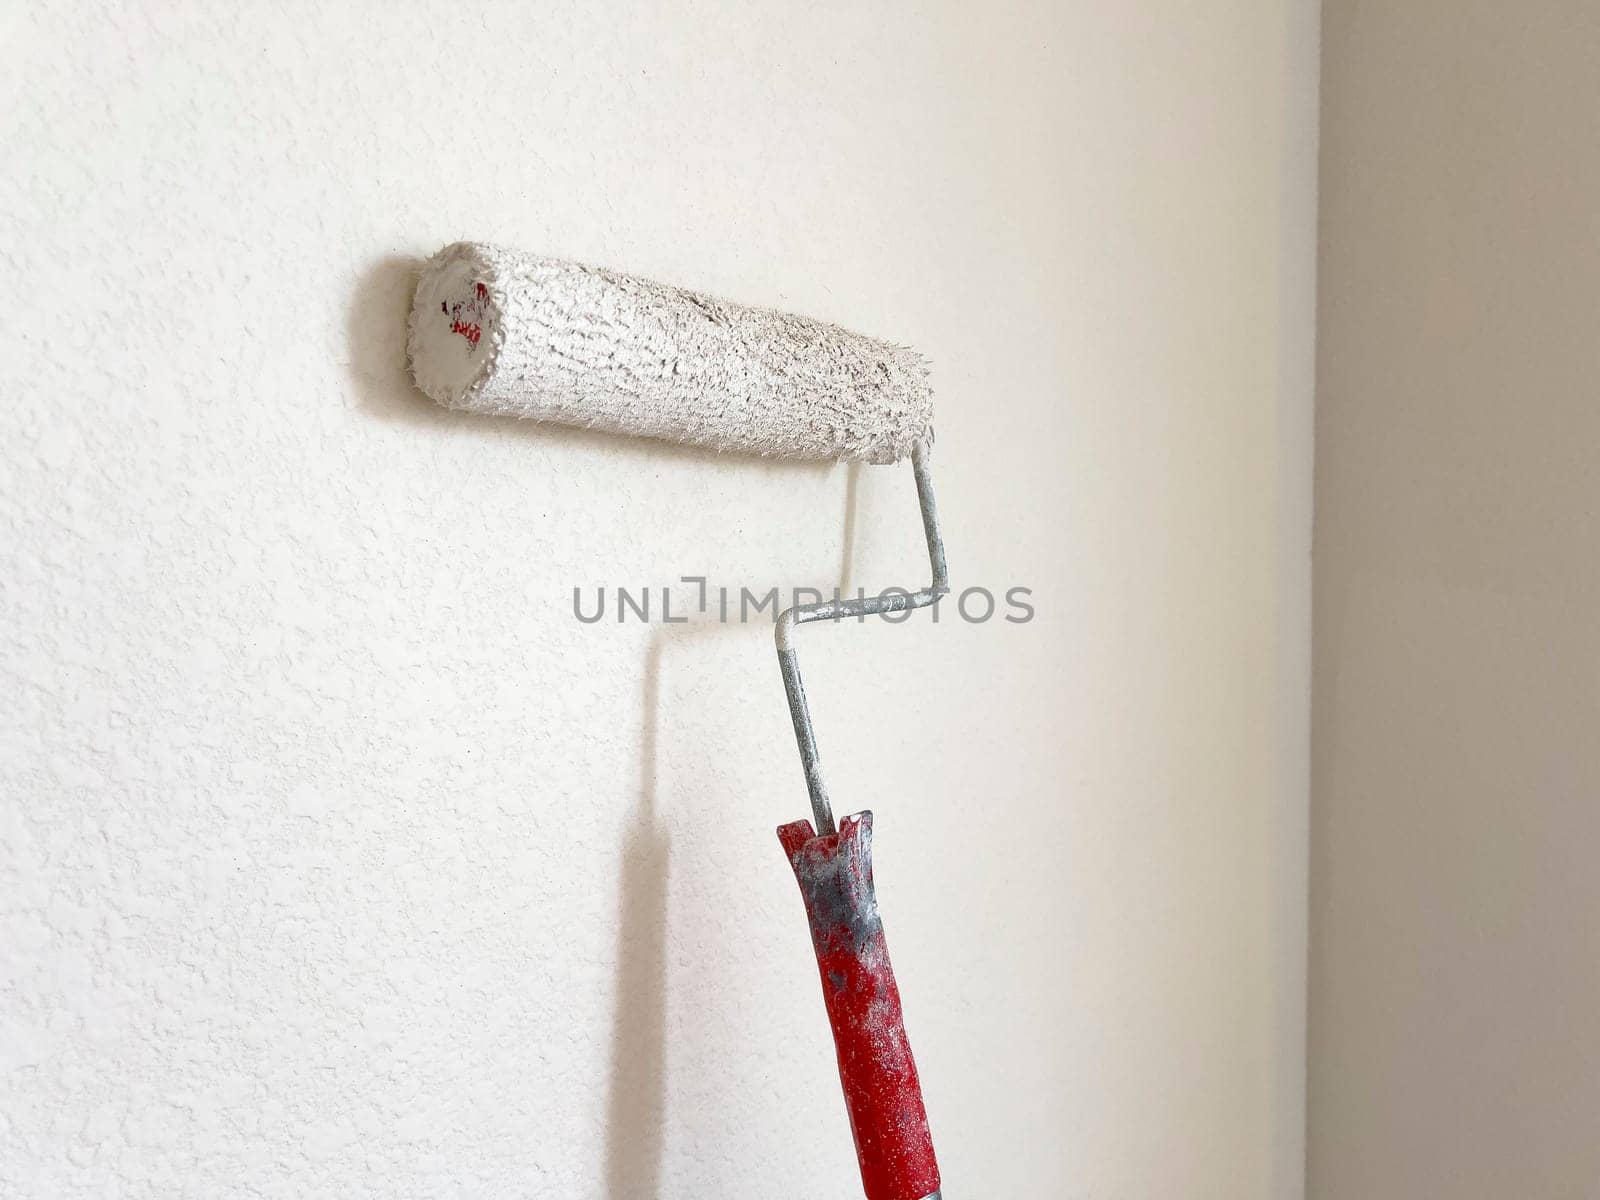 Detailed process of painting a wall, with a focus on a paint roller applying a fresh white coat, symbolizing the transformative power of a simple home improvement task.